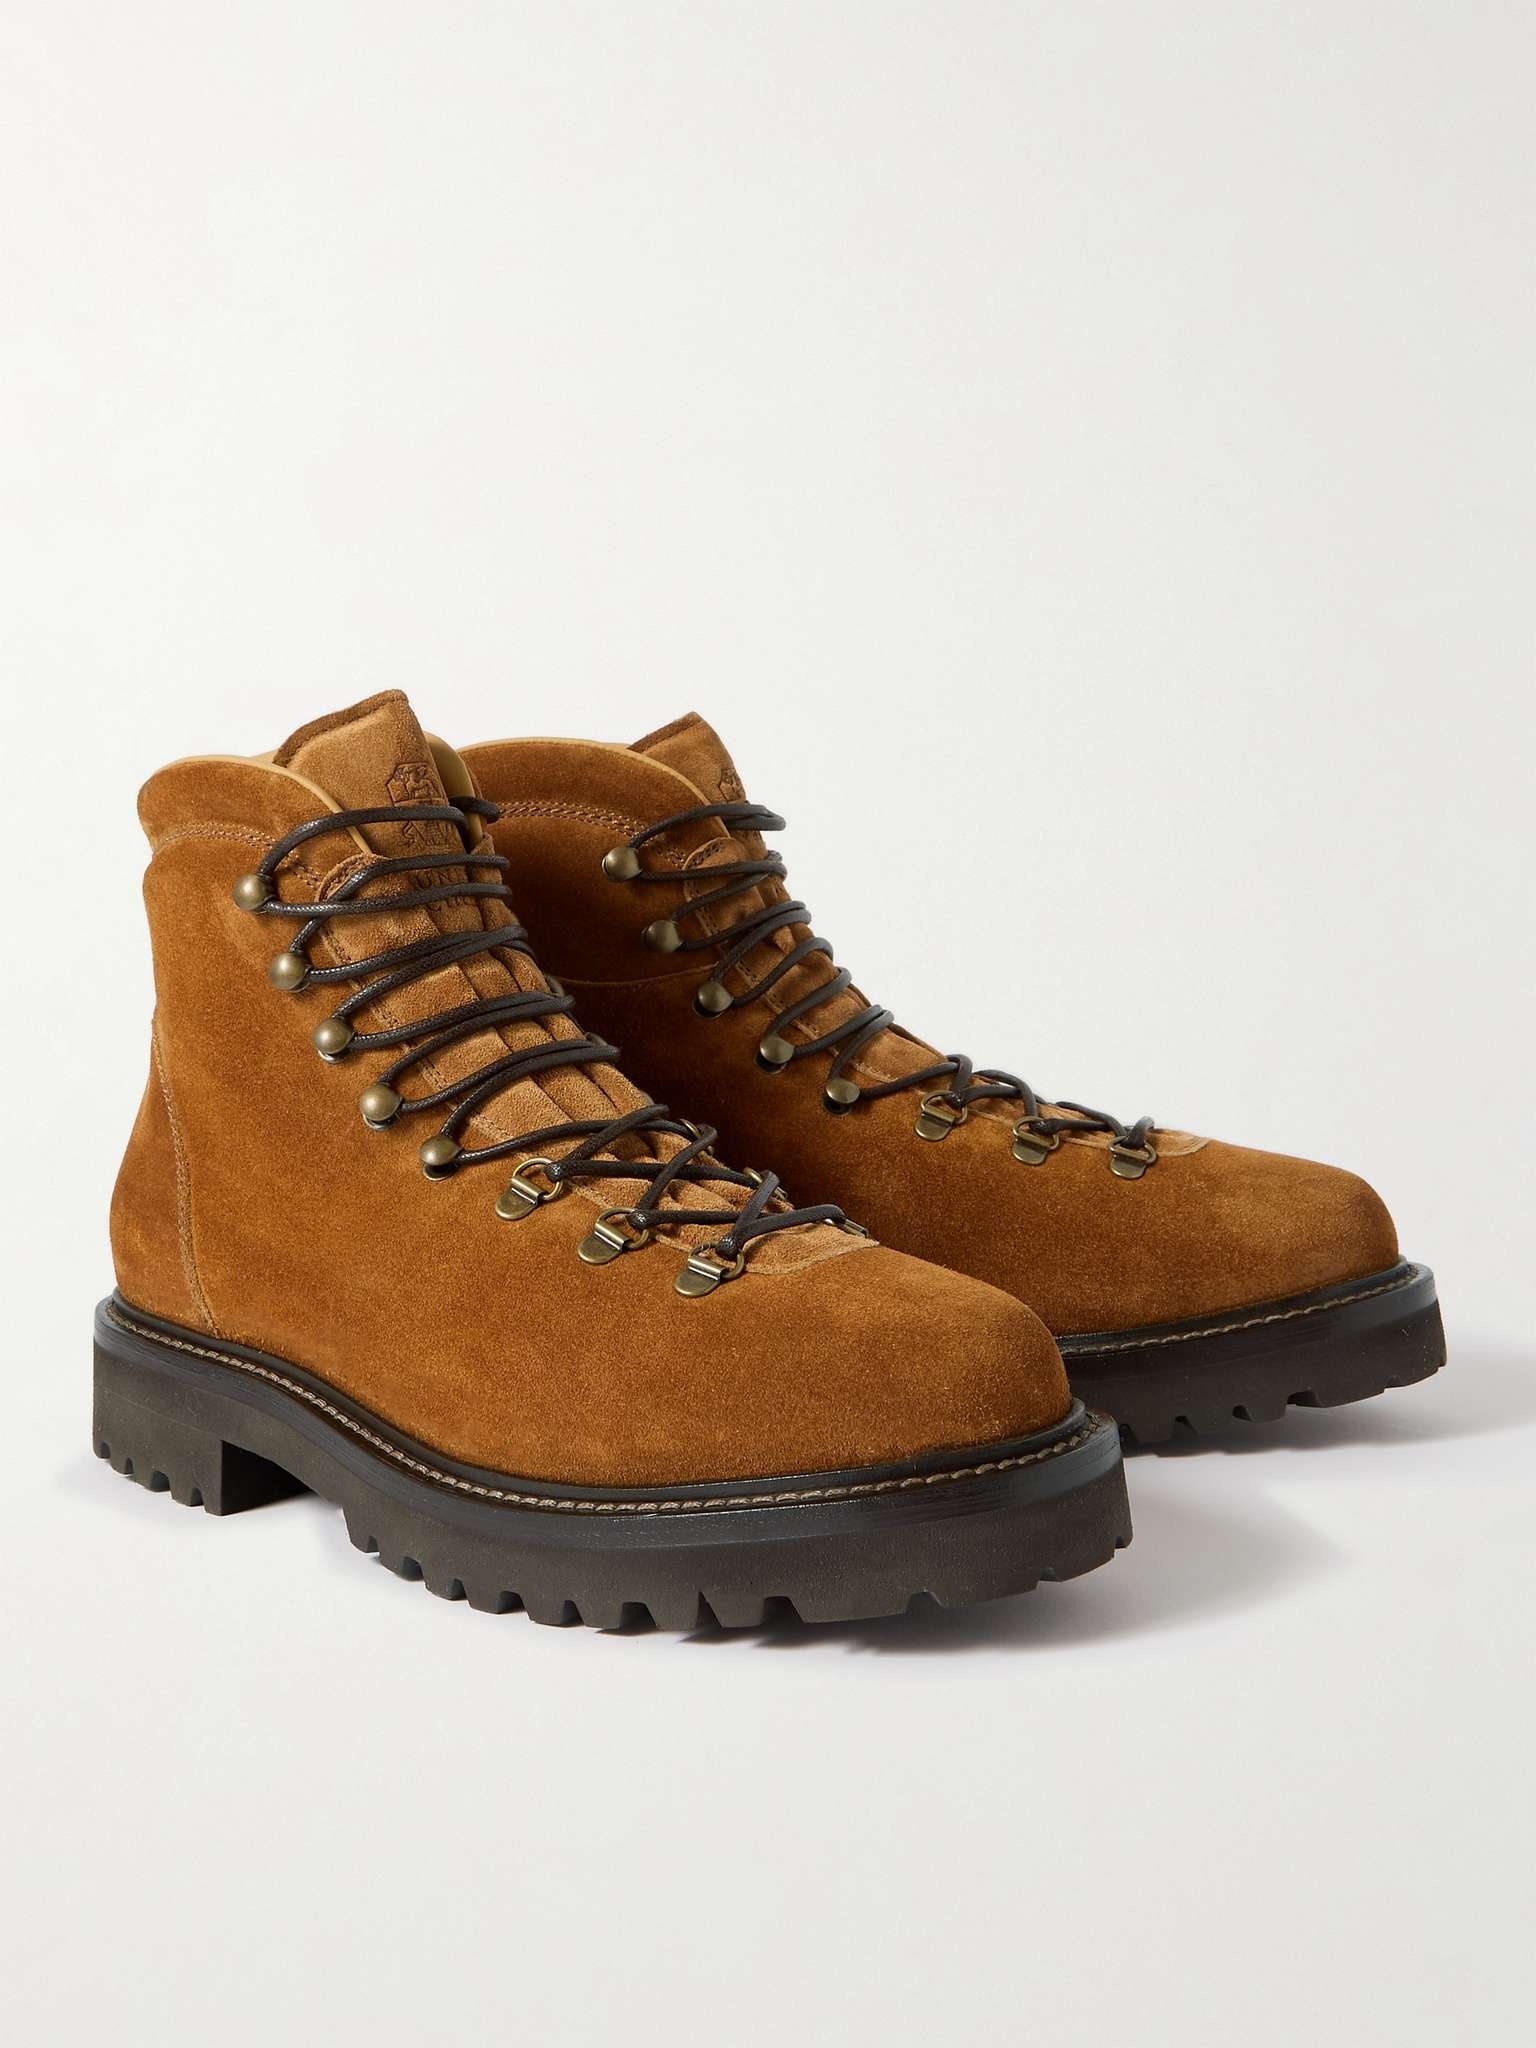 Shearling-Lined Suede Hiking Boots - 4